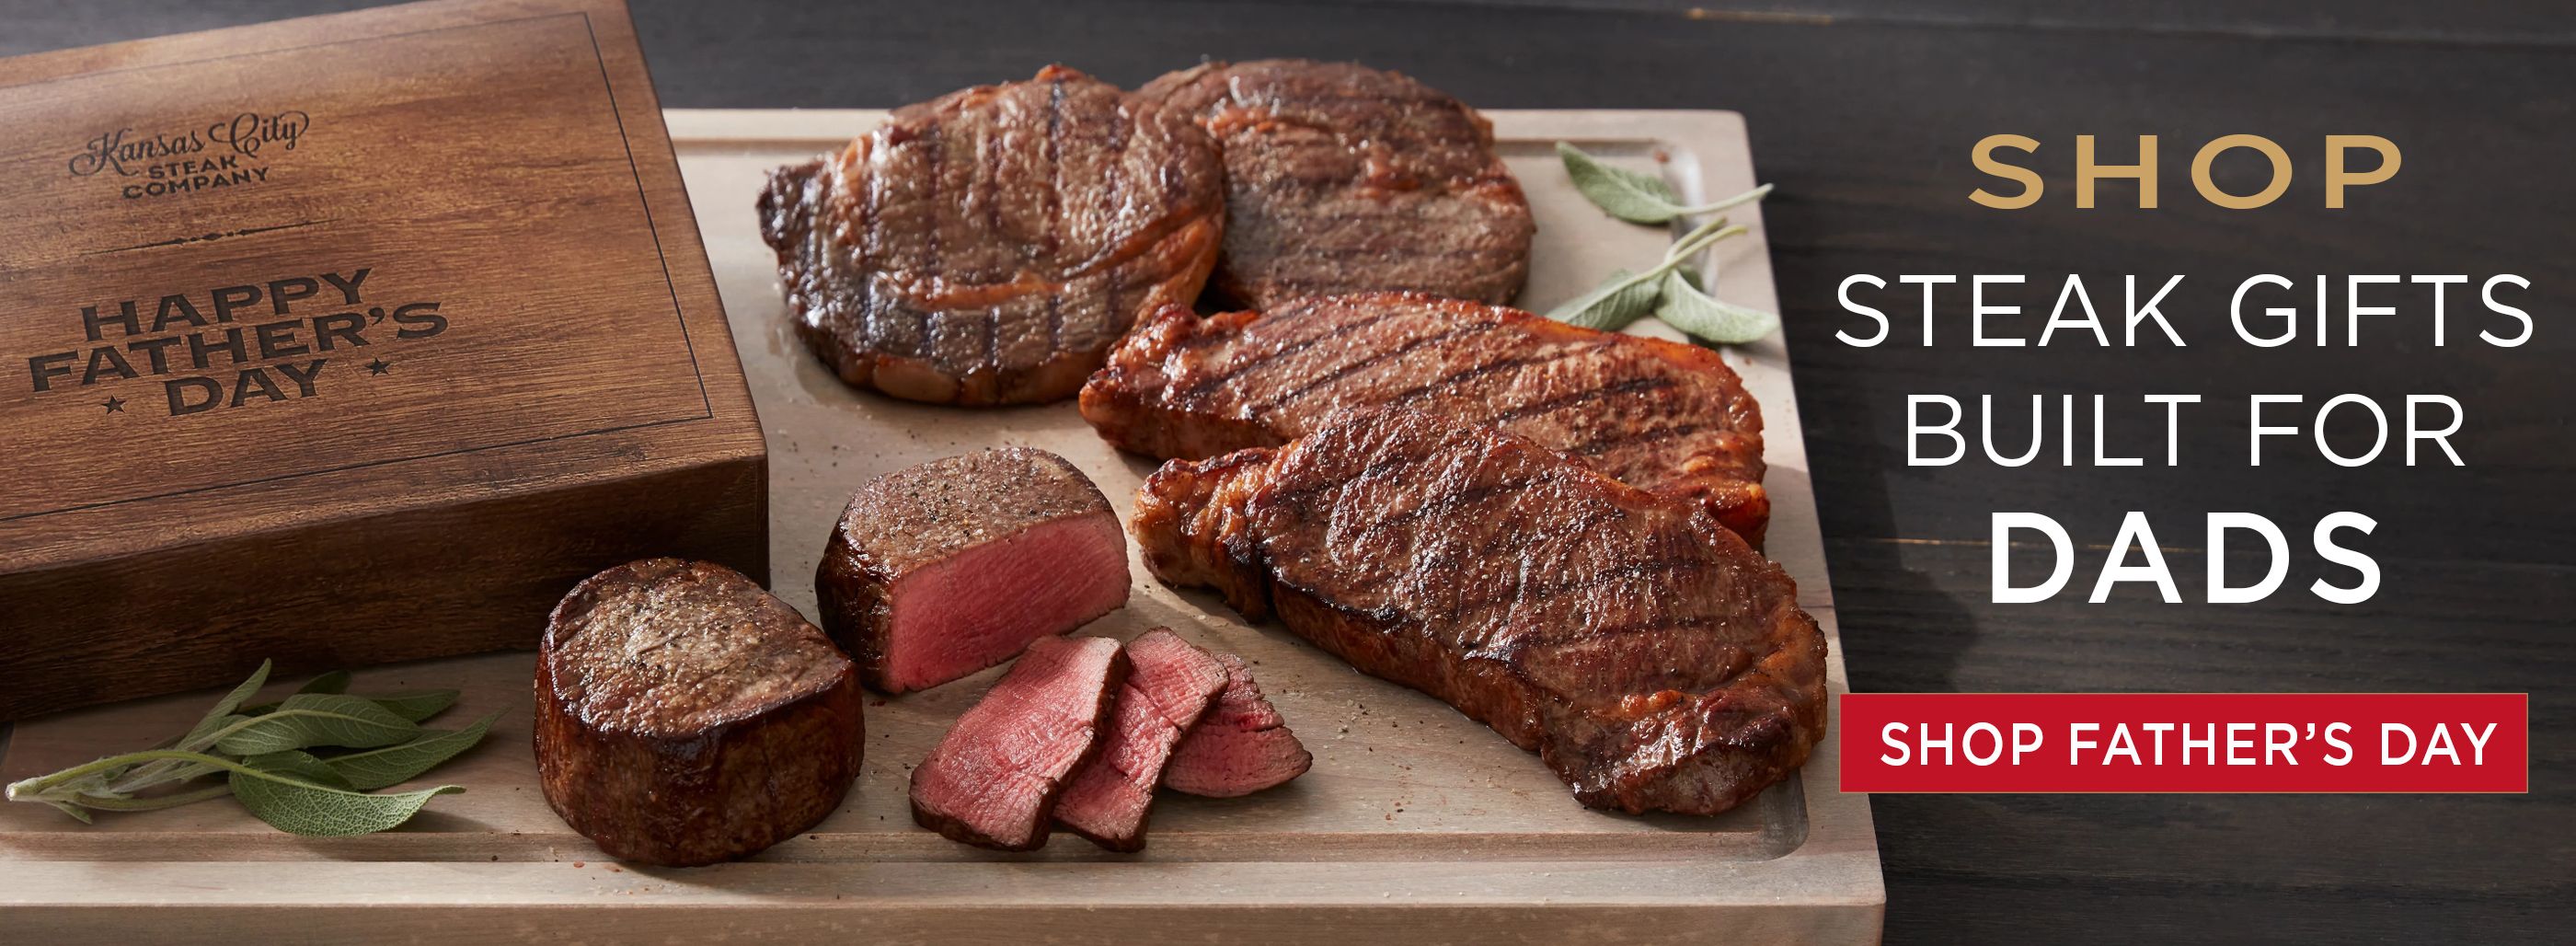 Shop Father's Day steak gifts built for Dads.